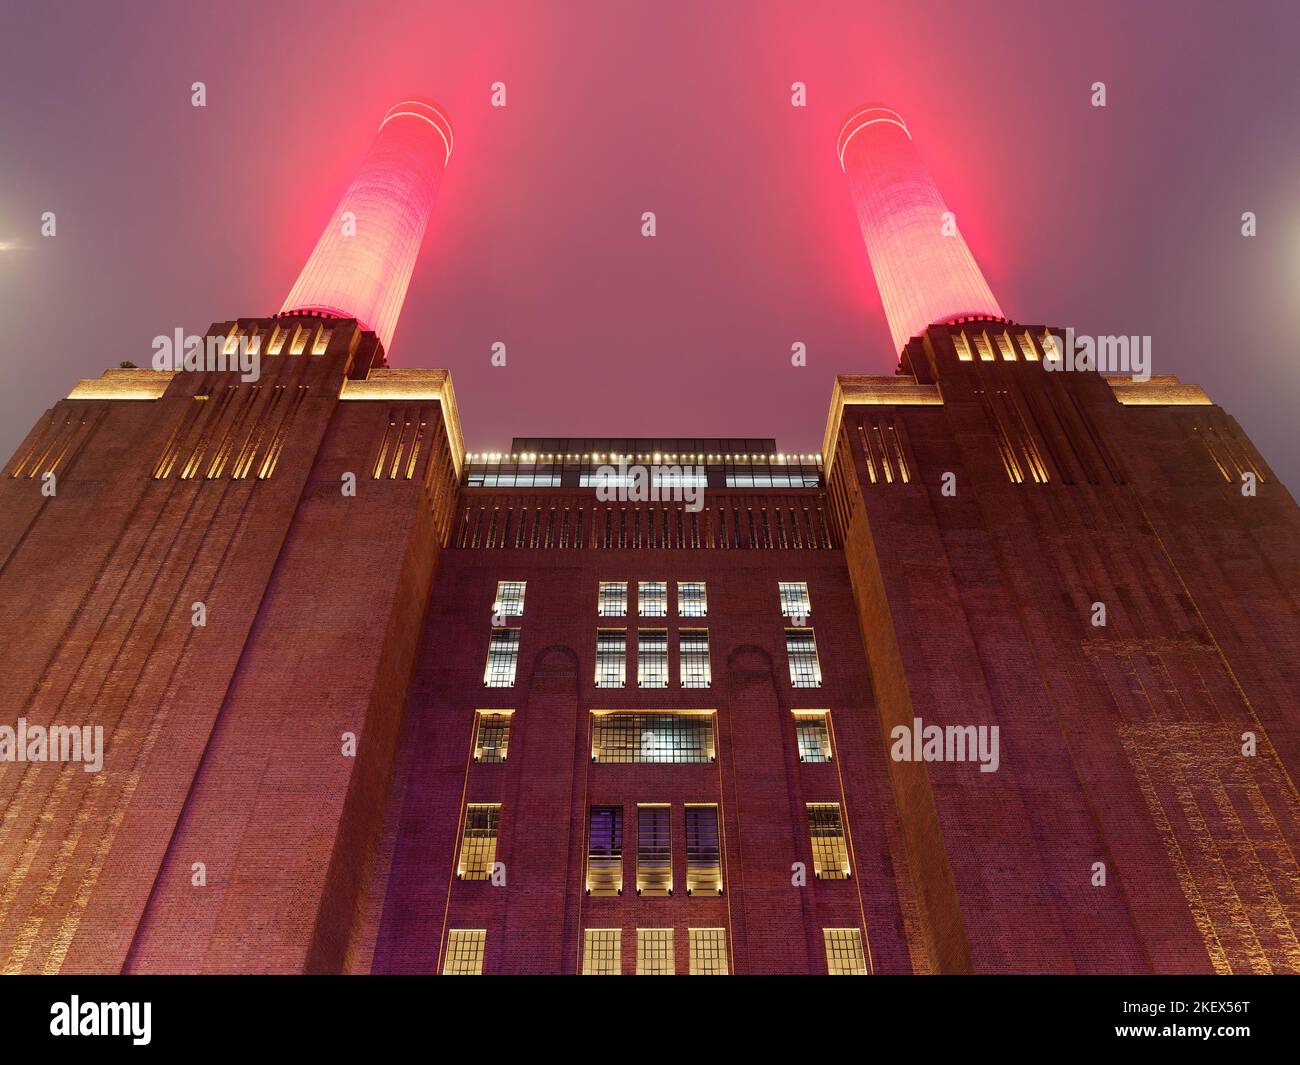 View looking up at Battersea Power Station in London illuminated on a misty night with bright red chimneys piercing the sky Stock Photo